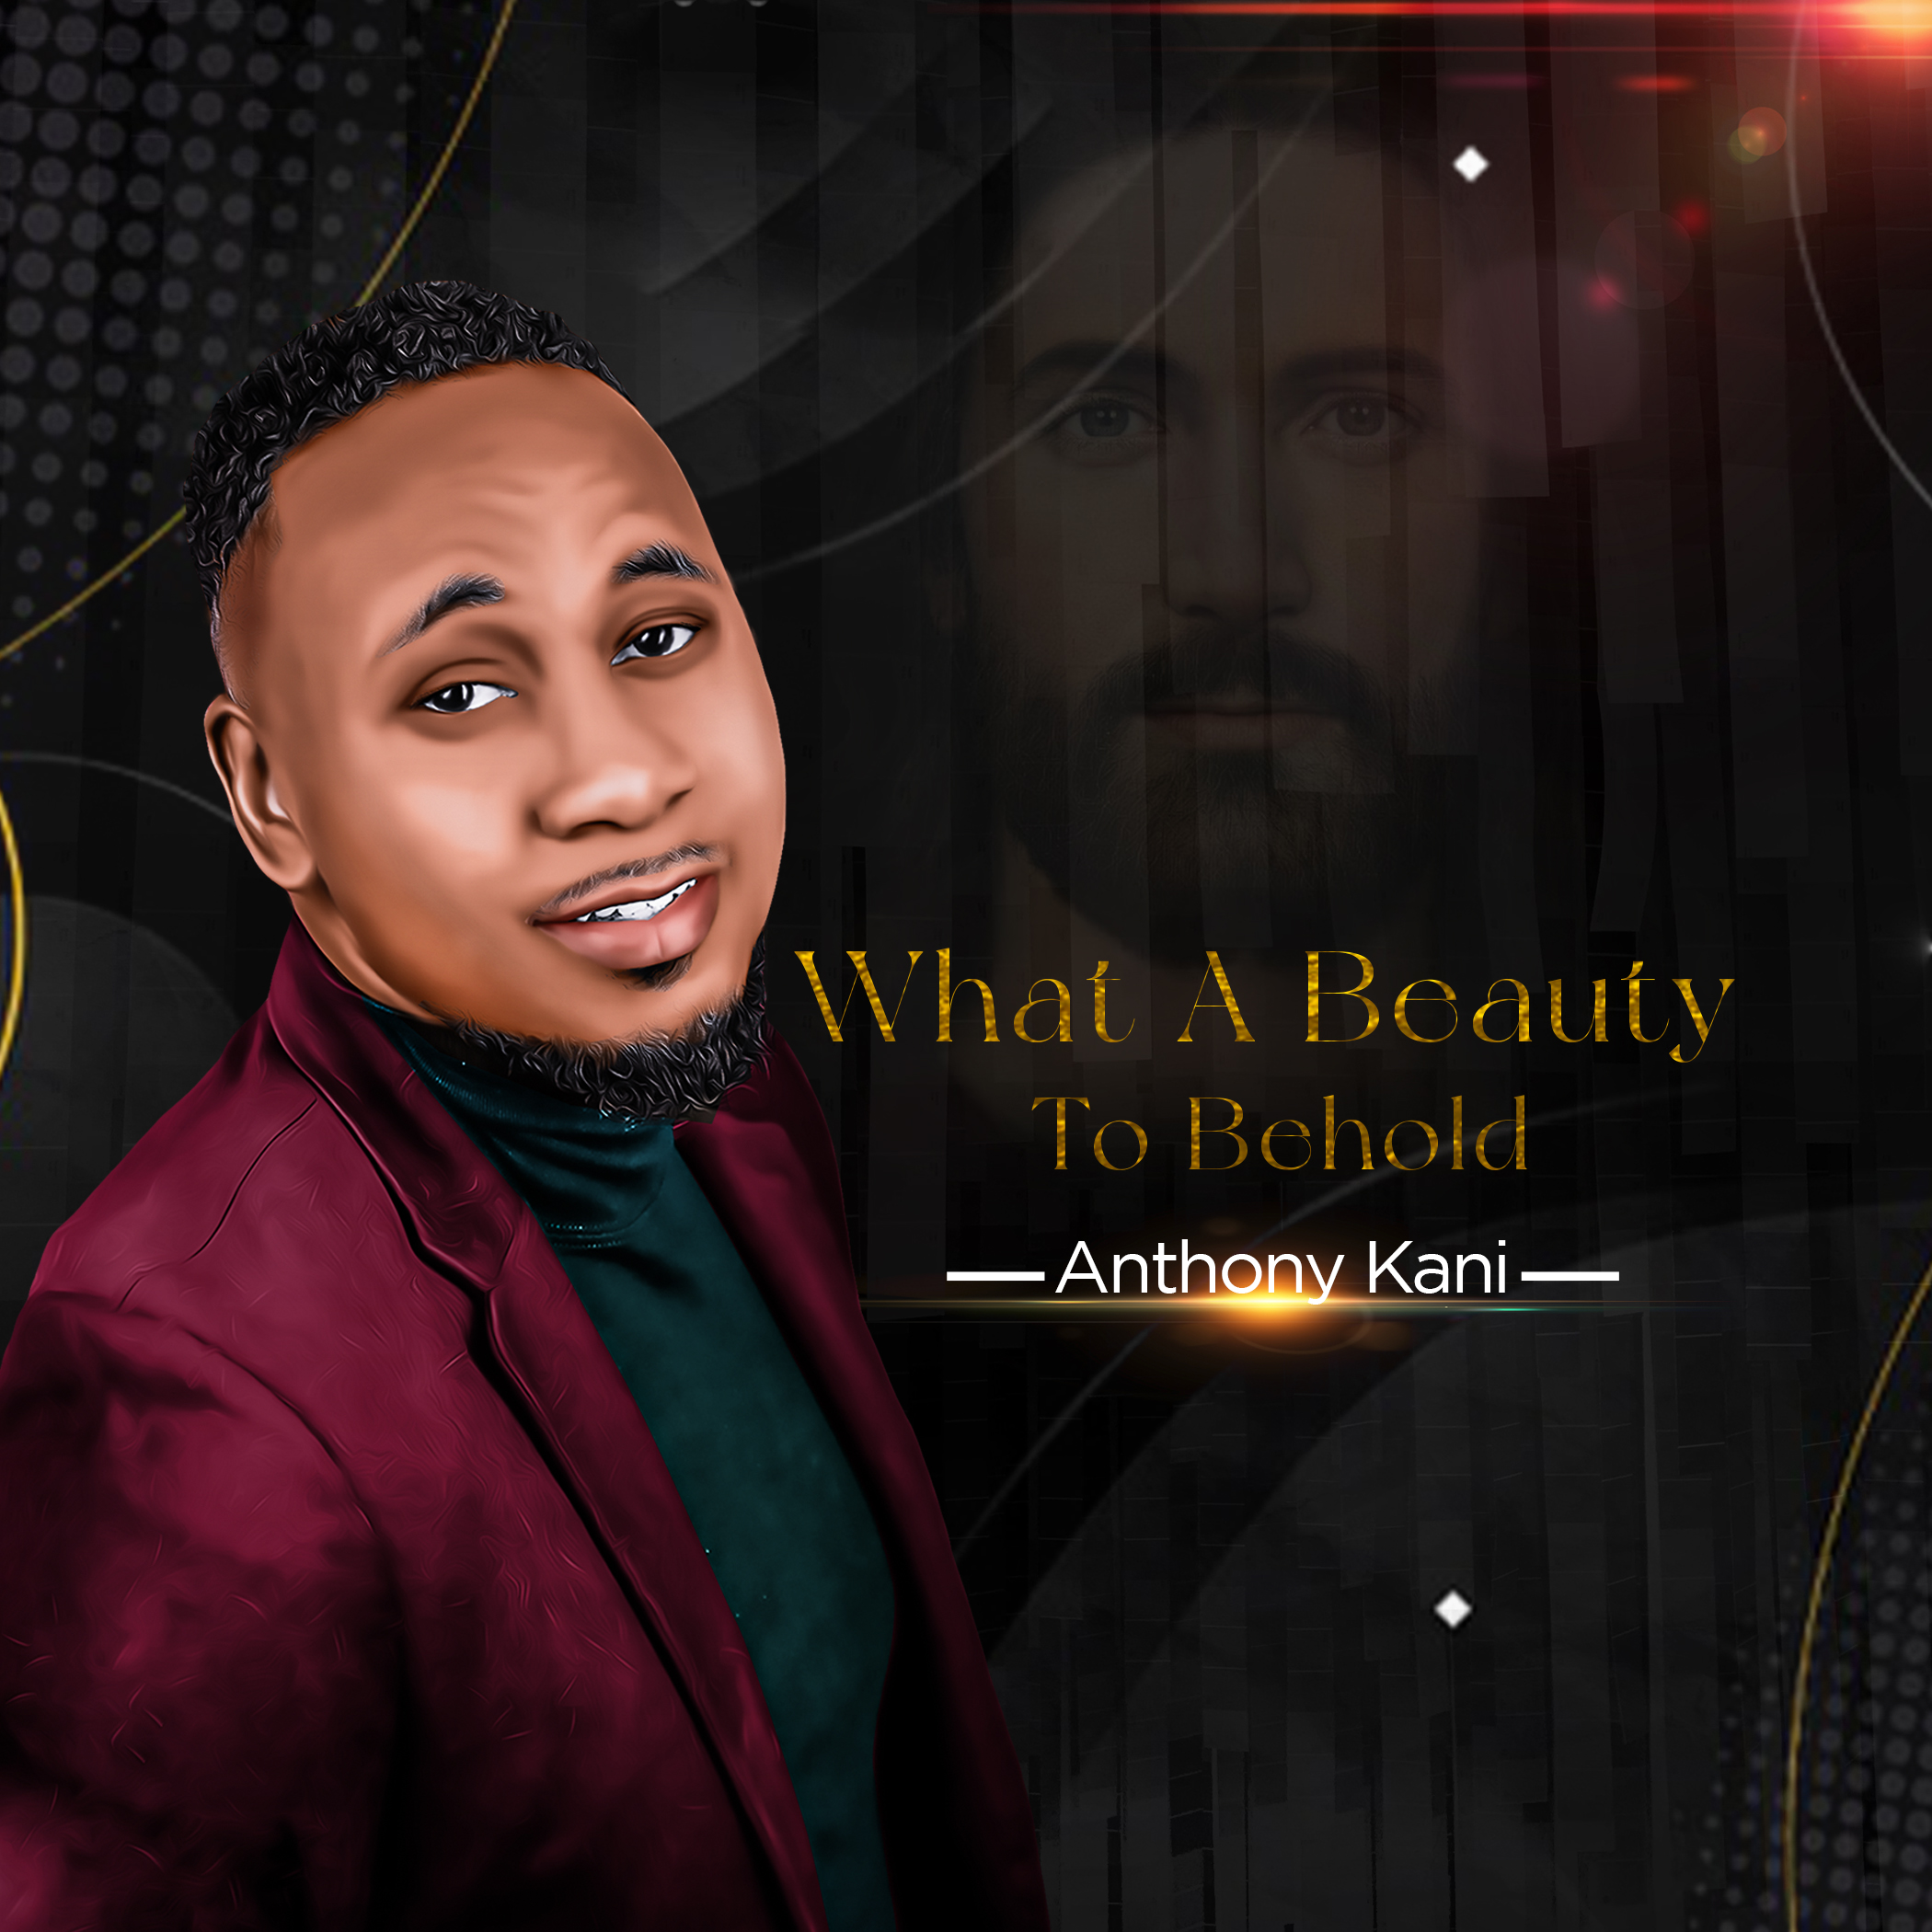 Anthony Kani - What A Beauty To Behold